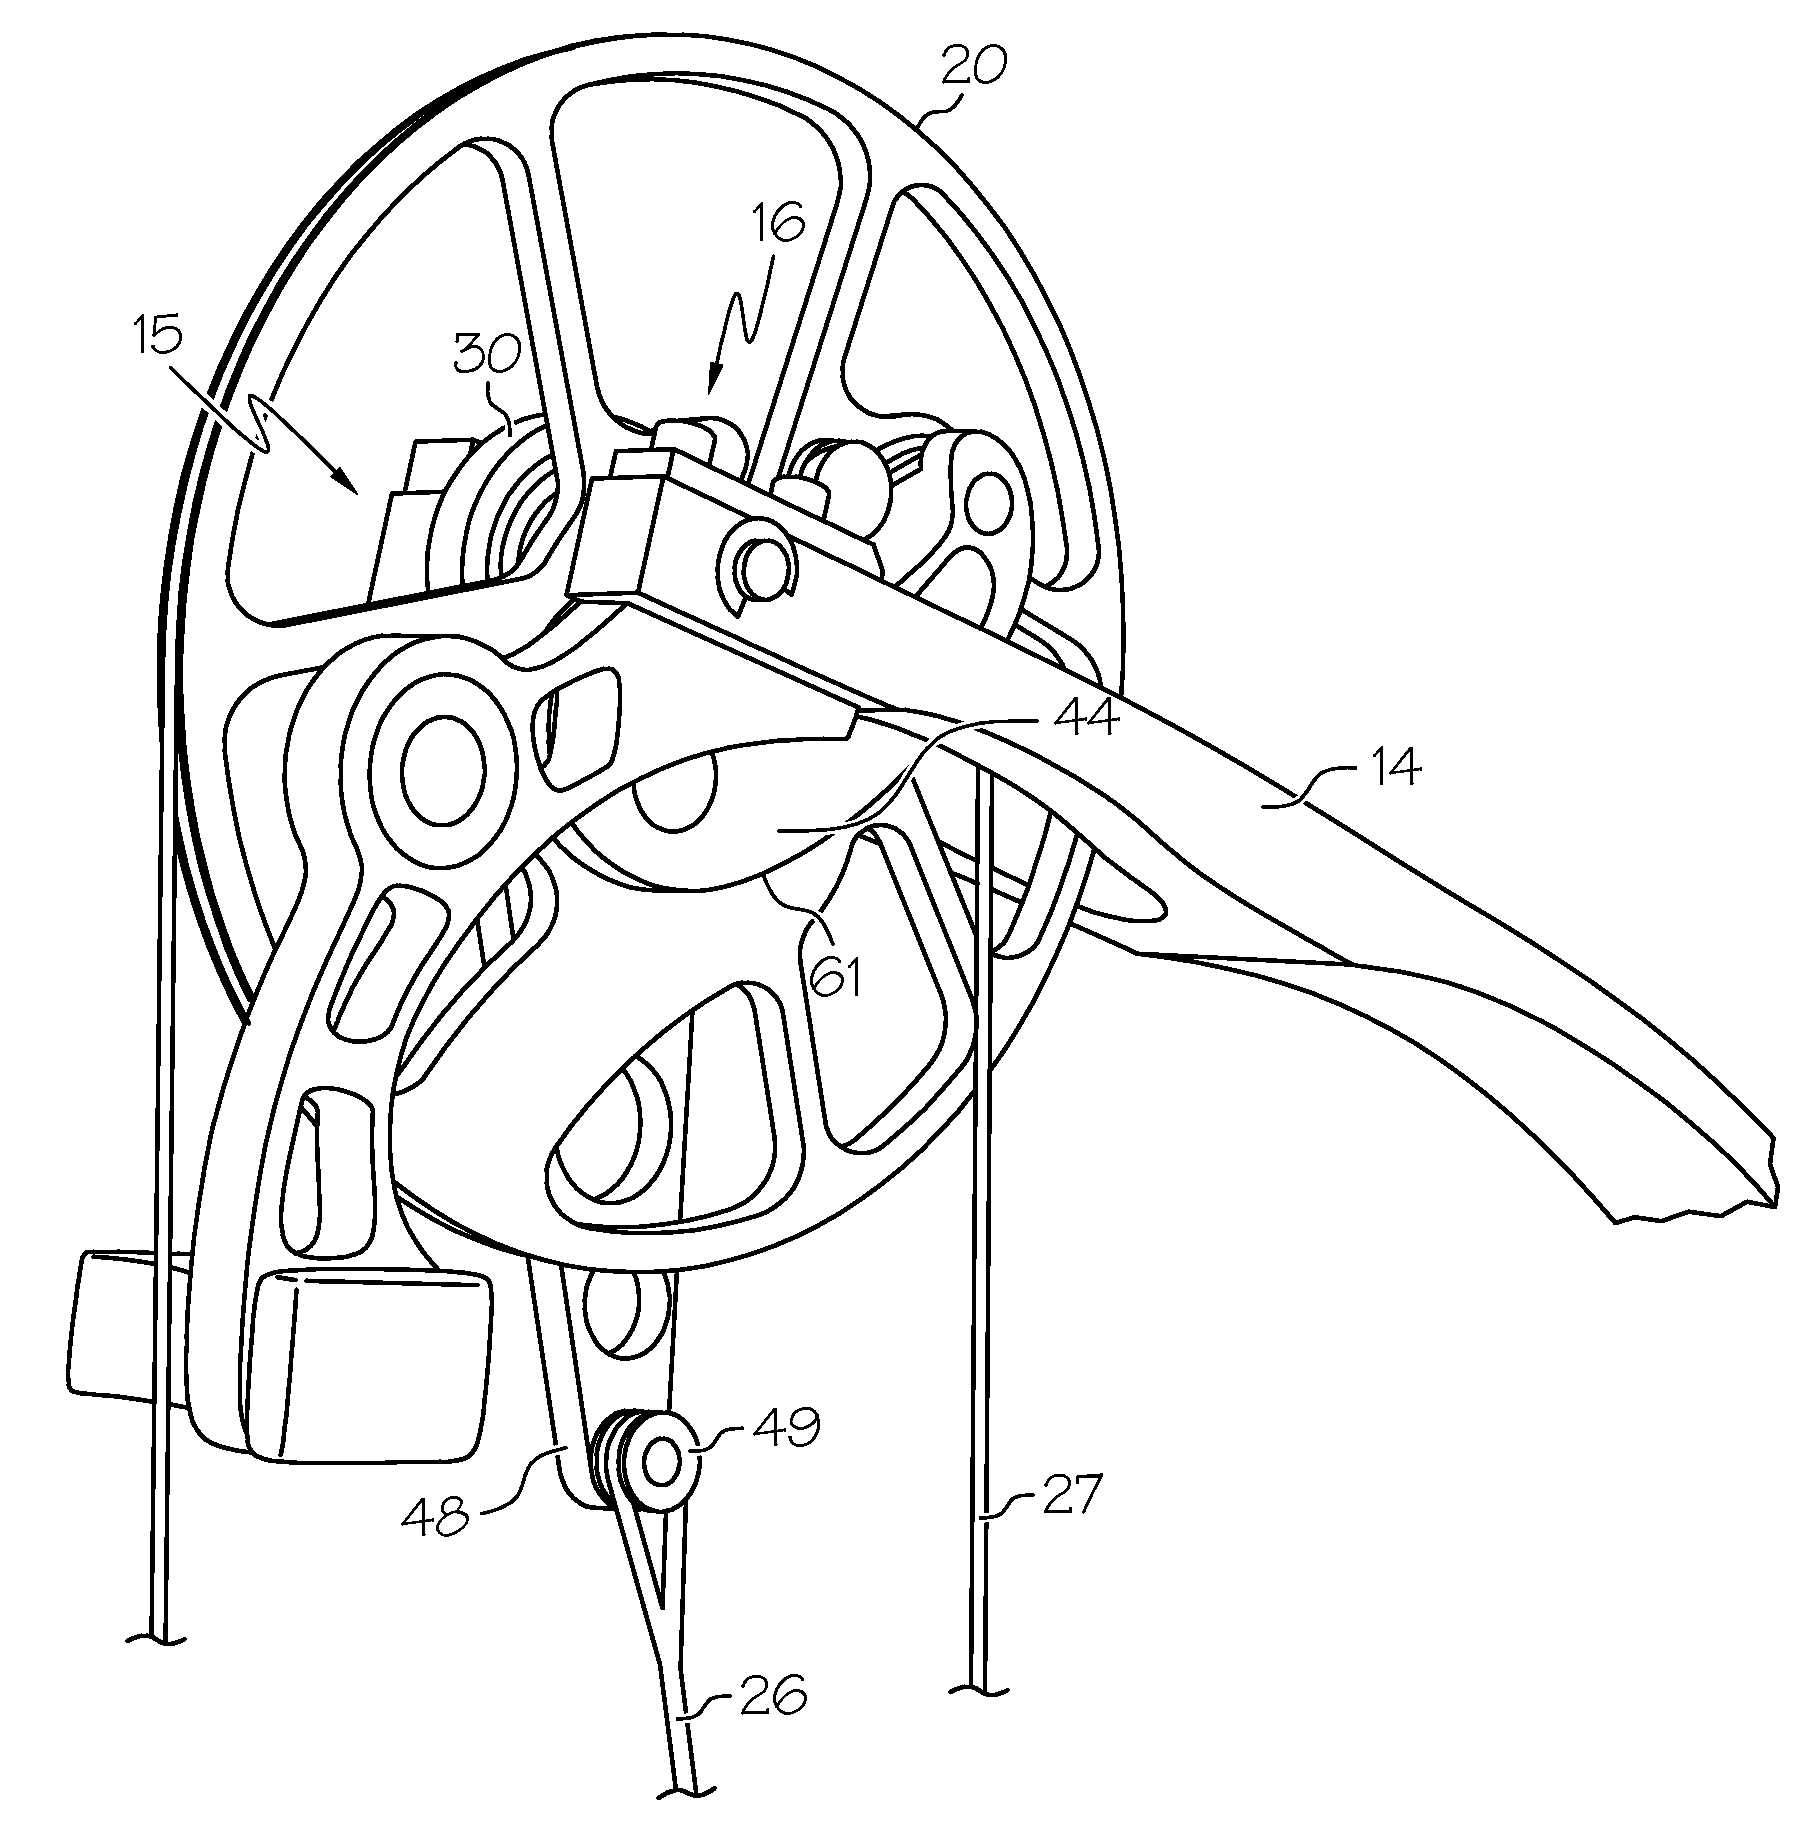 Archery Bow With Force Vectoring Anchor